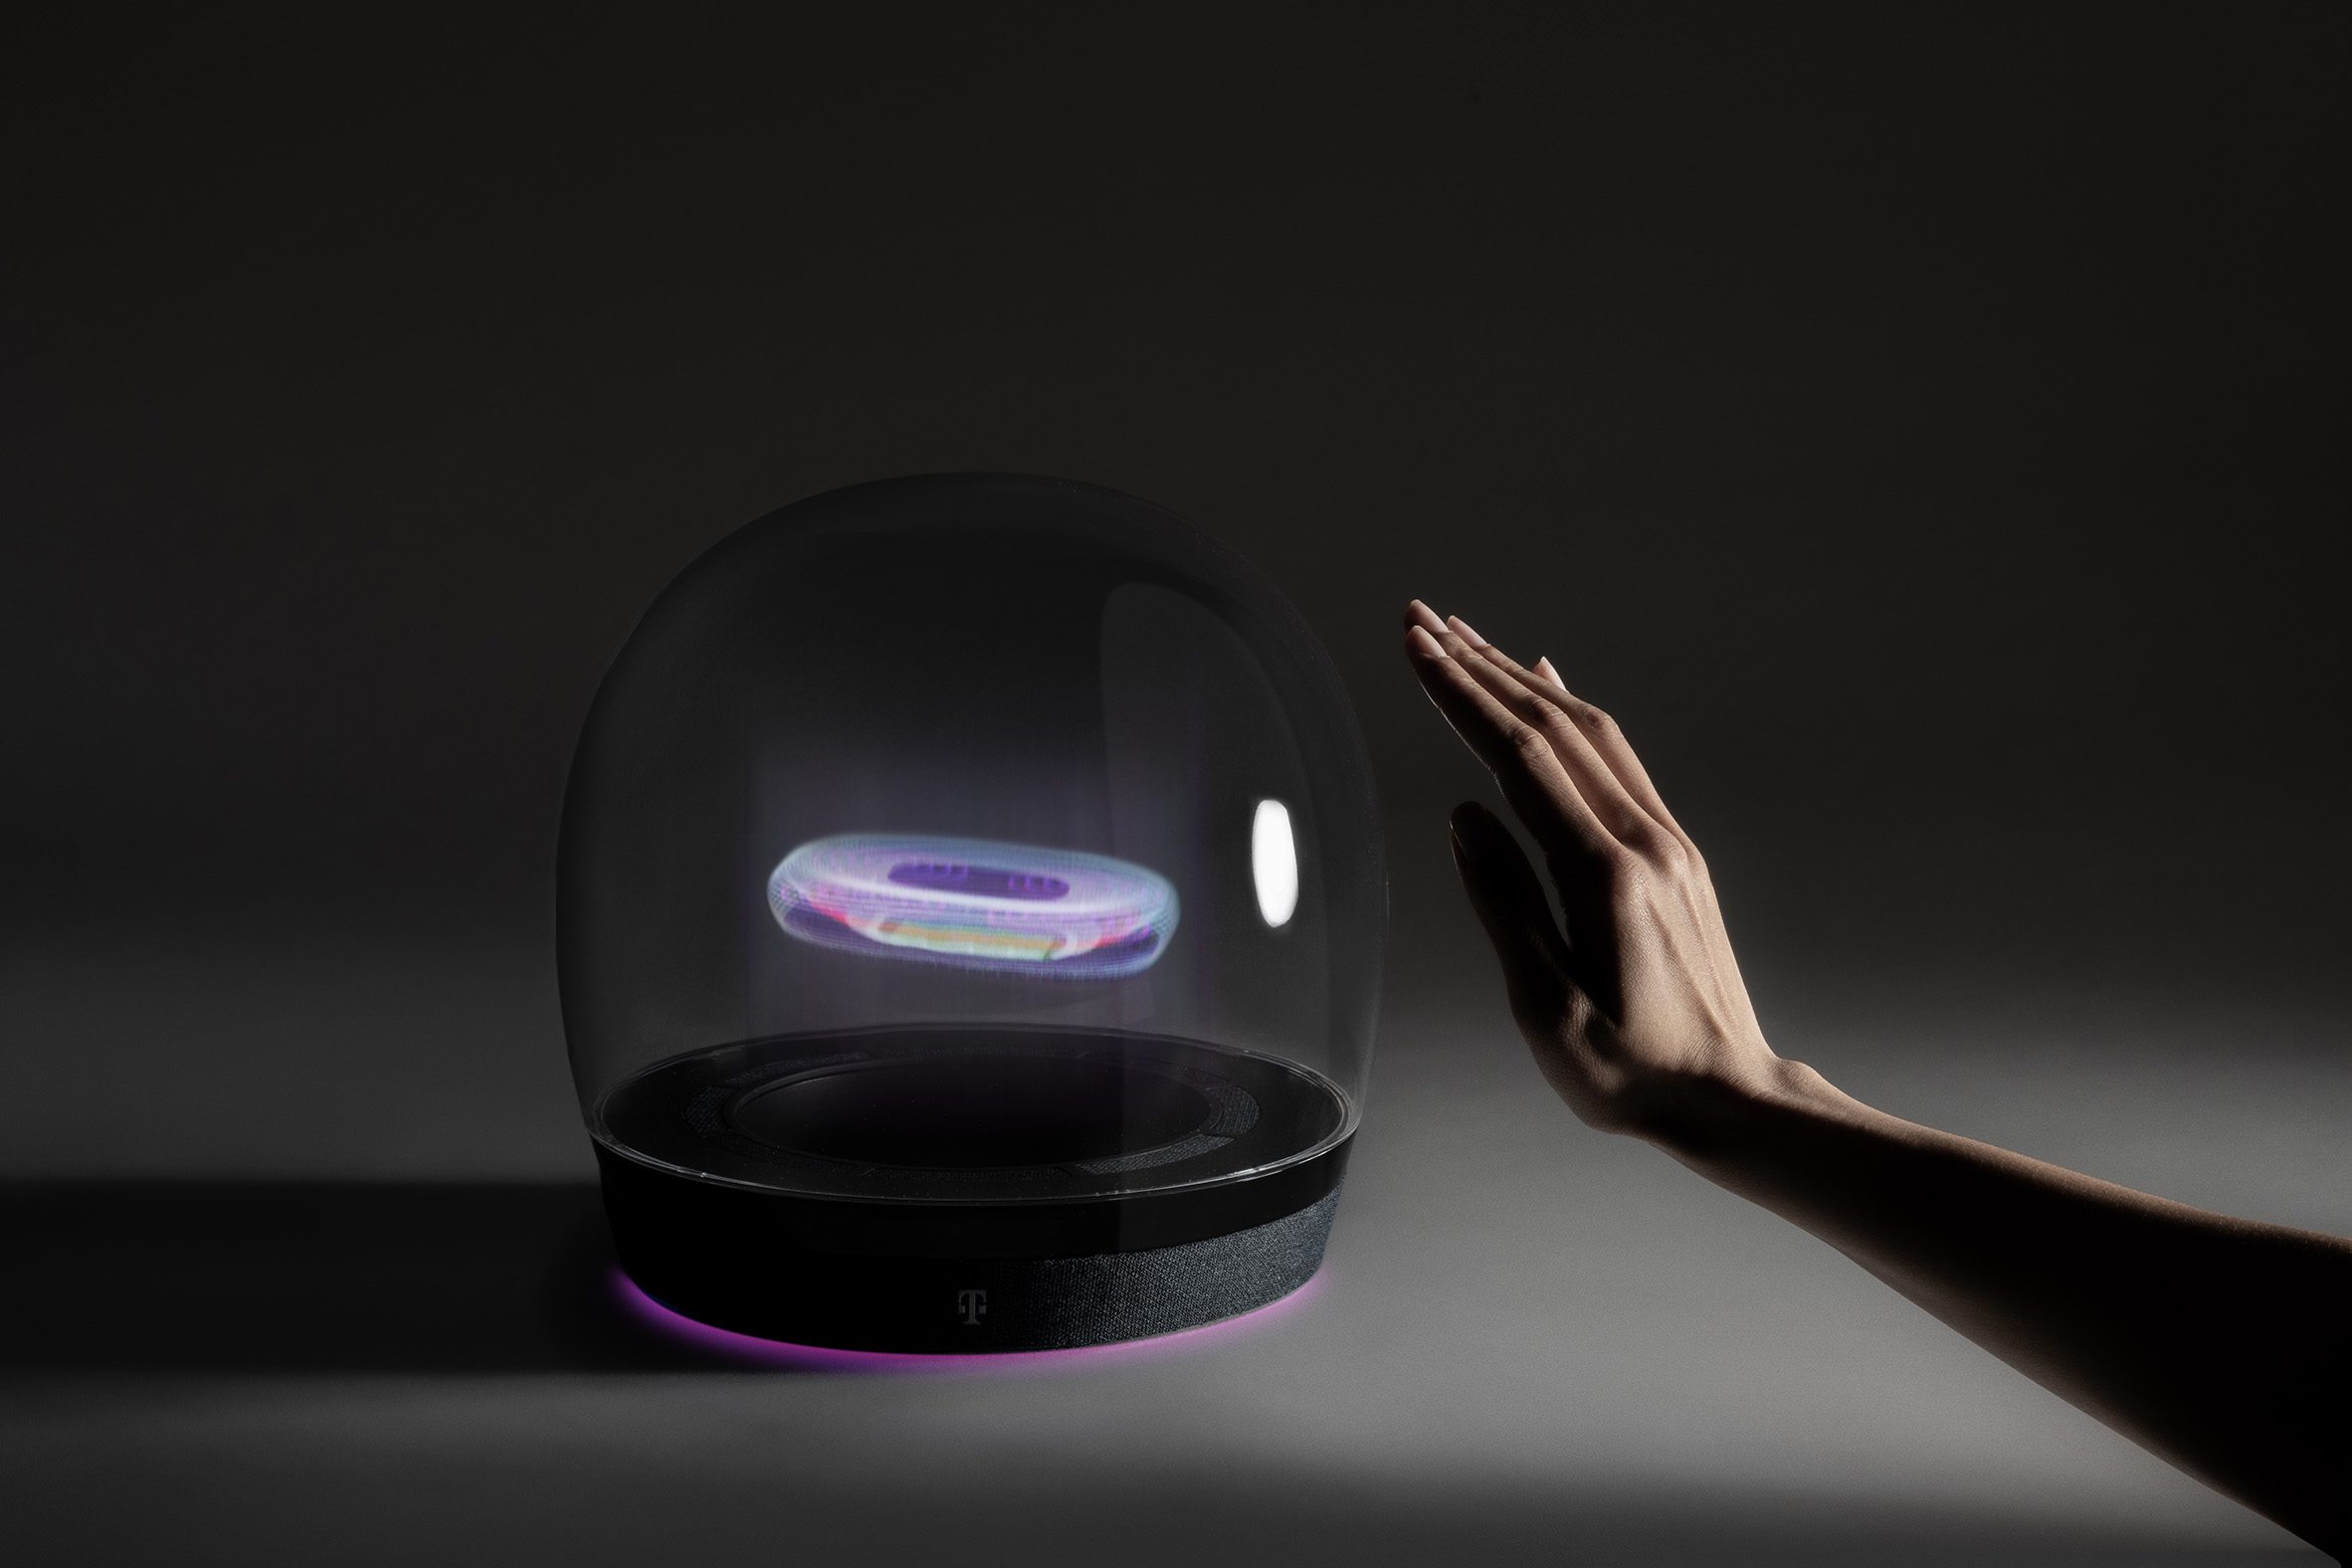 Photo of a prototype of Layer and Deutsche Telekom's Concept T holographic smarthome hub, showing a transparent domed unit containing a 3D holographic image